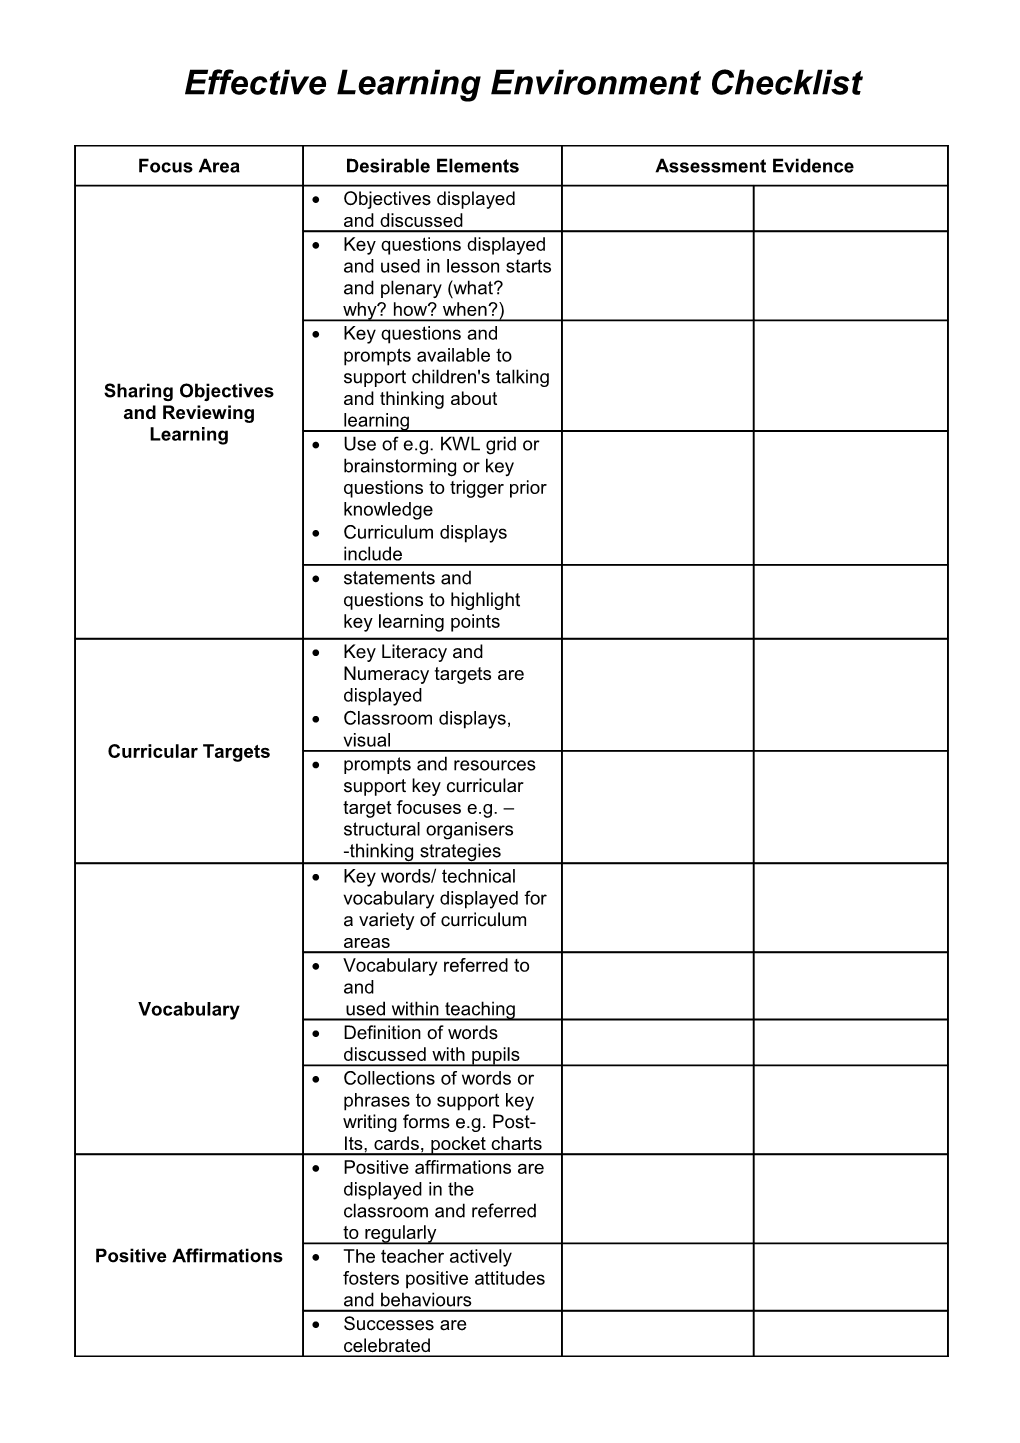 Effective Learning Environment Checklist